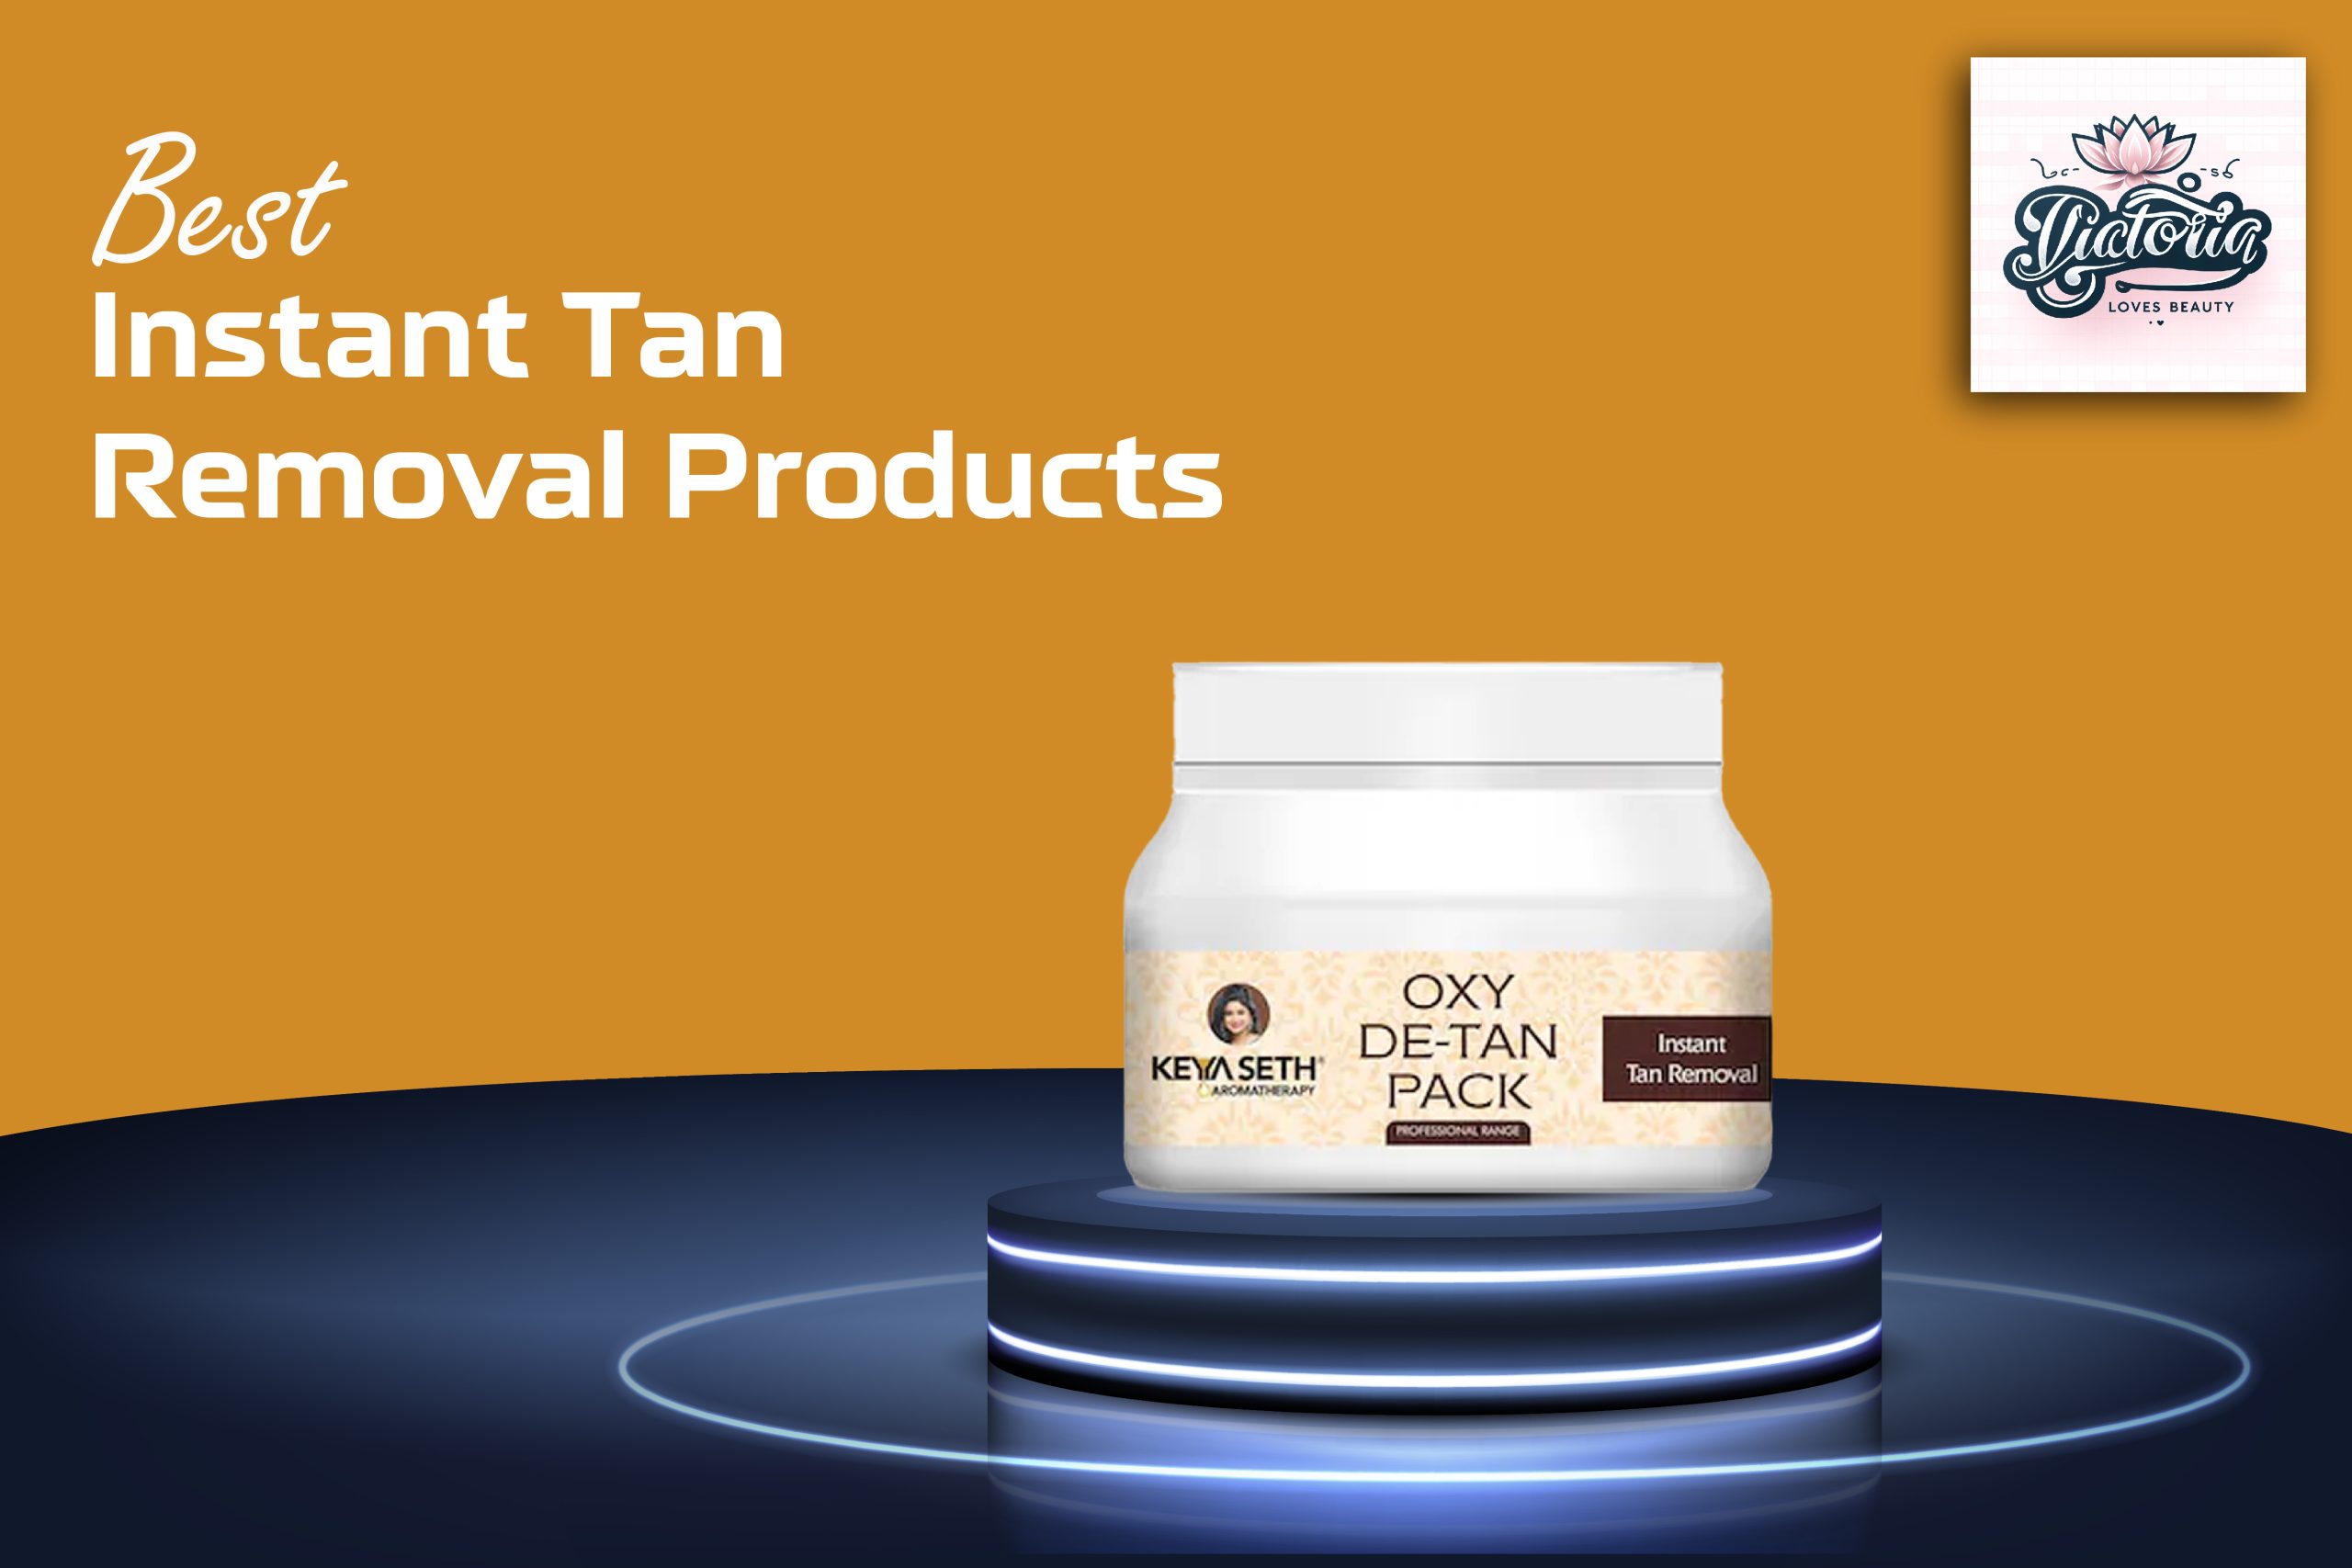 Best Instant Tan Removal Products